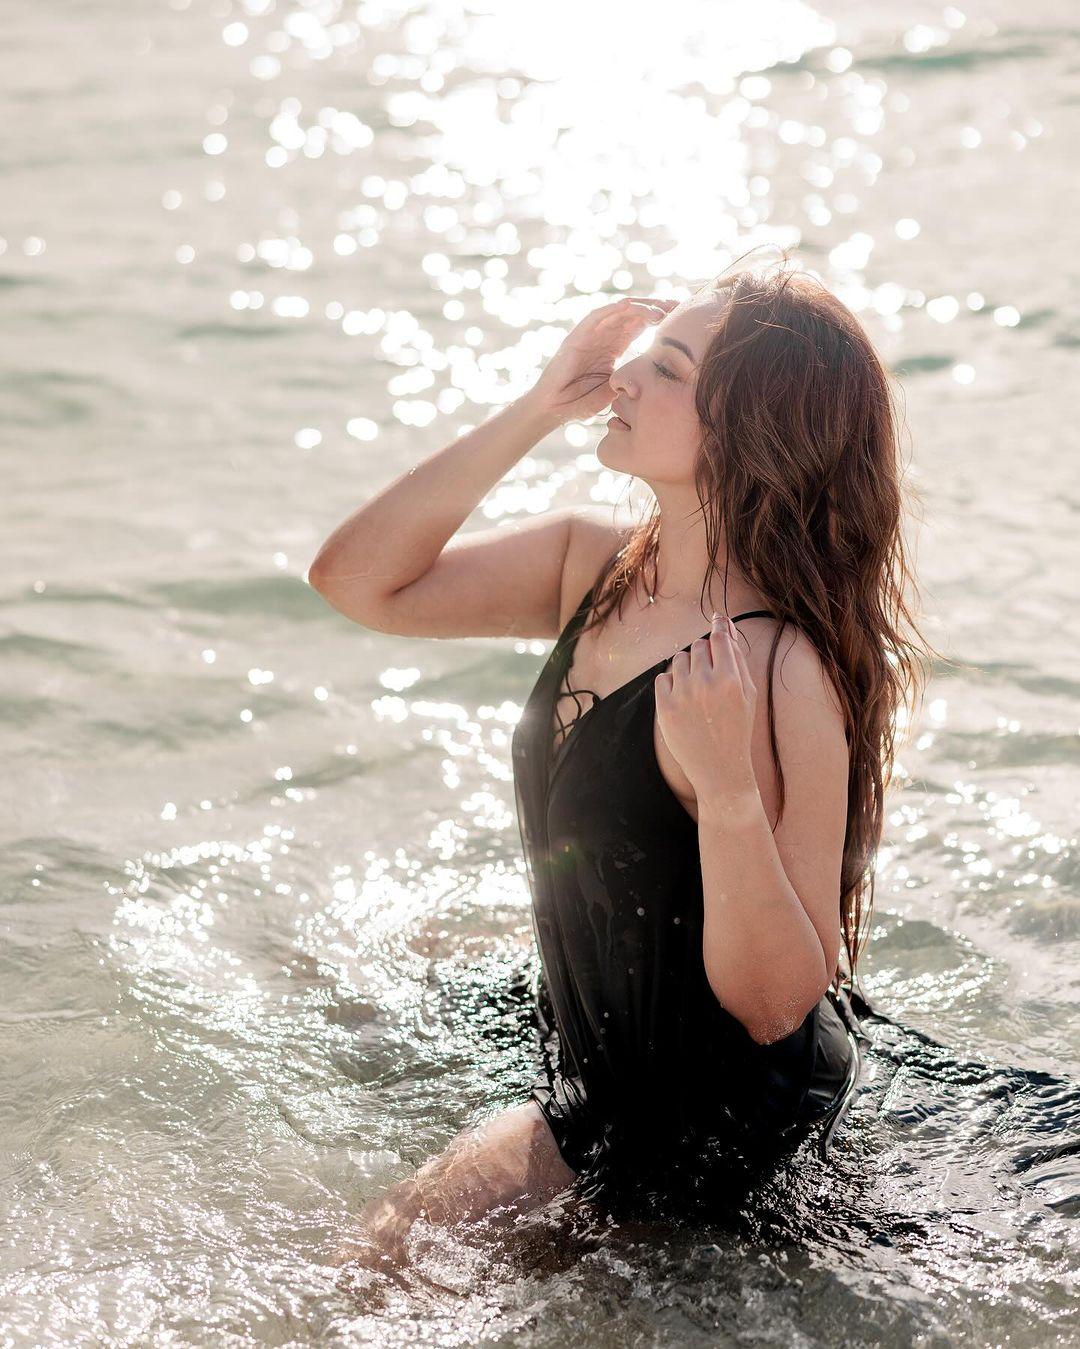 Sonakshi Sinha looks like a mermaid in this black monokini, and we can't take our eyes off her